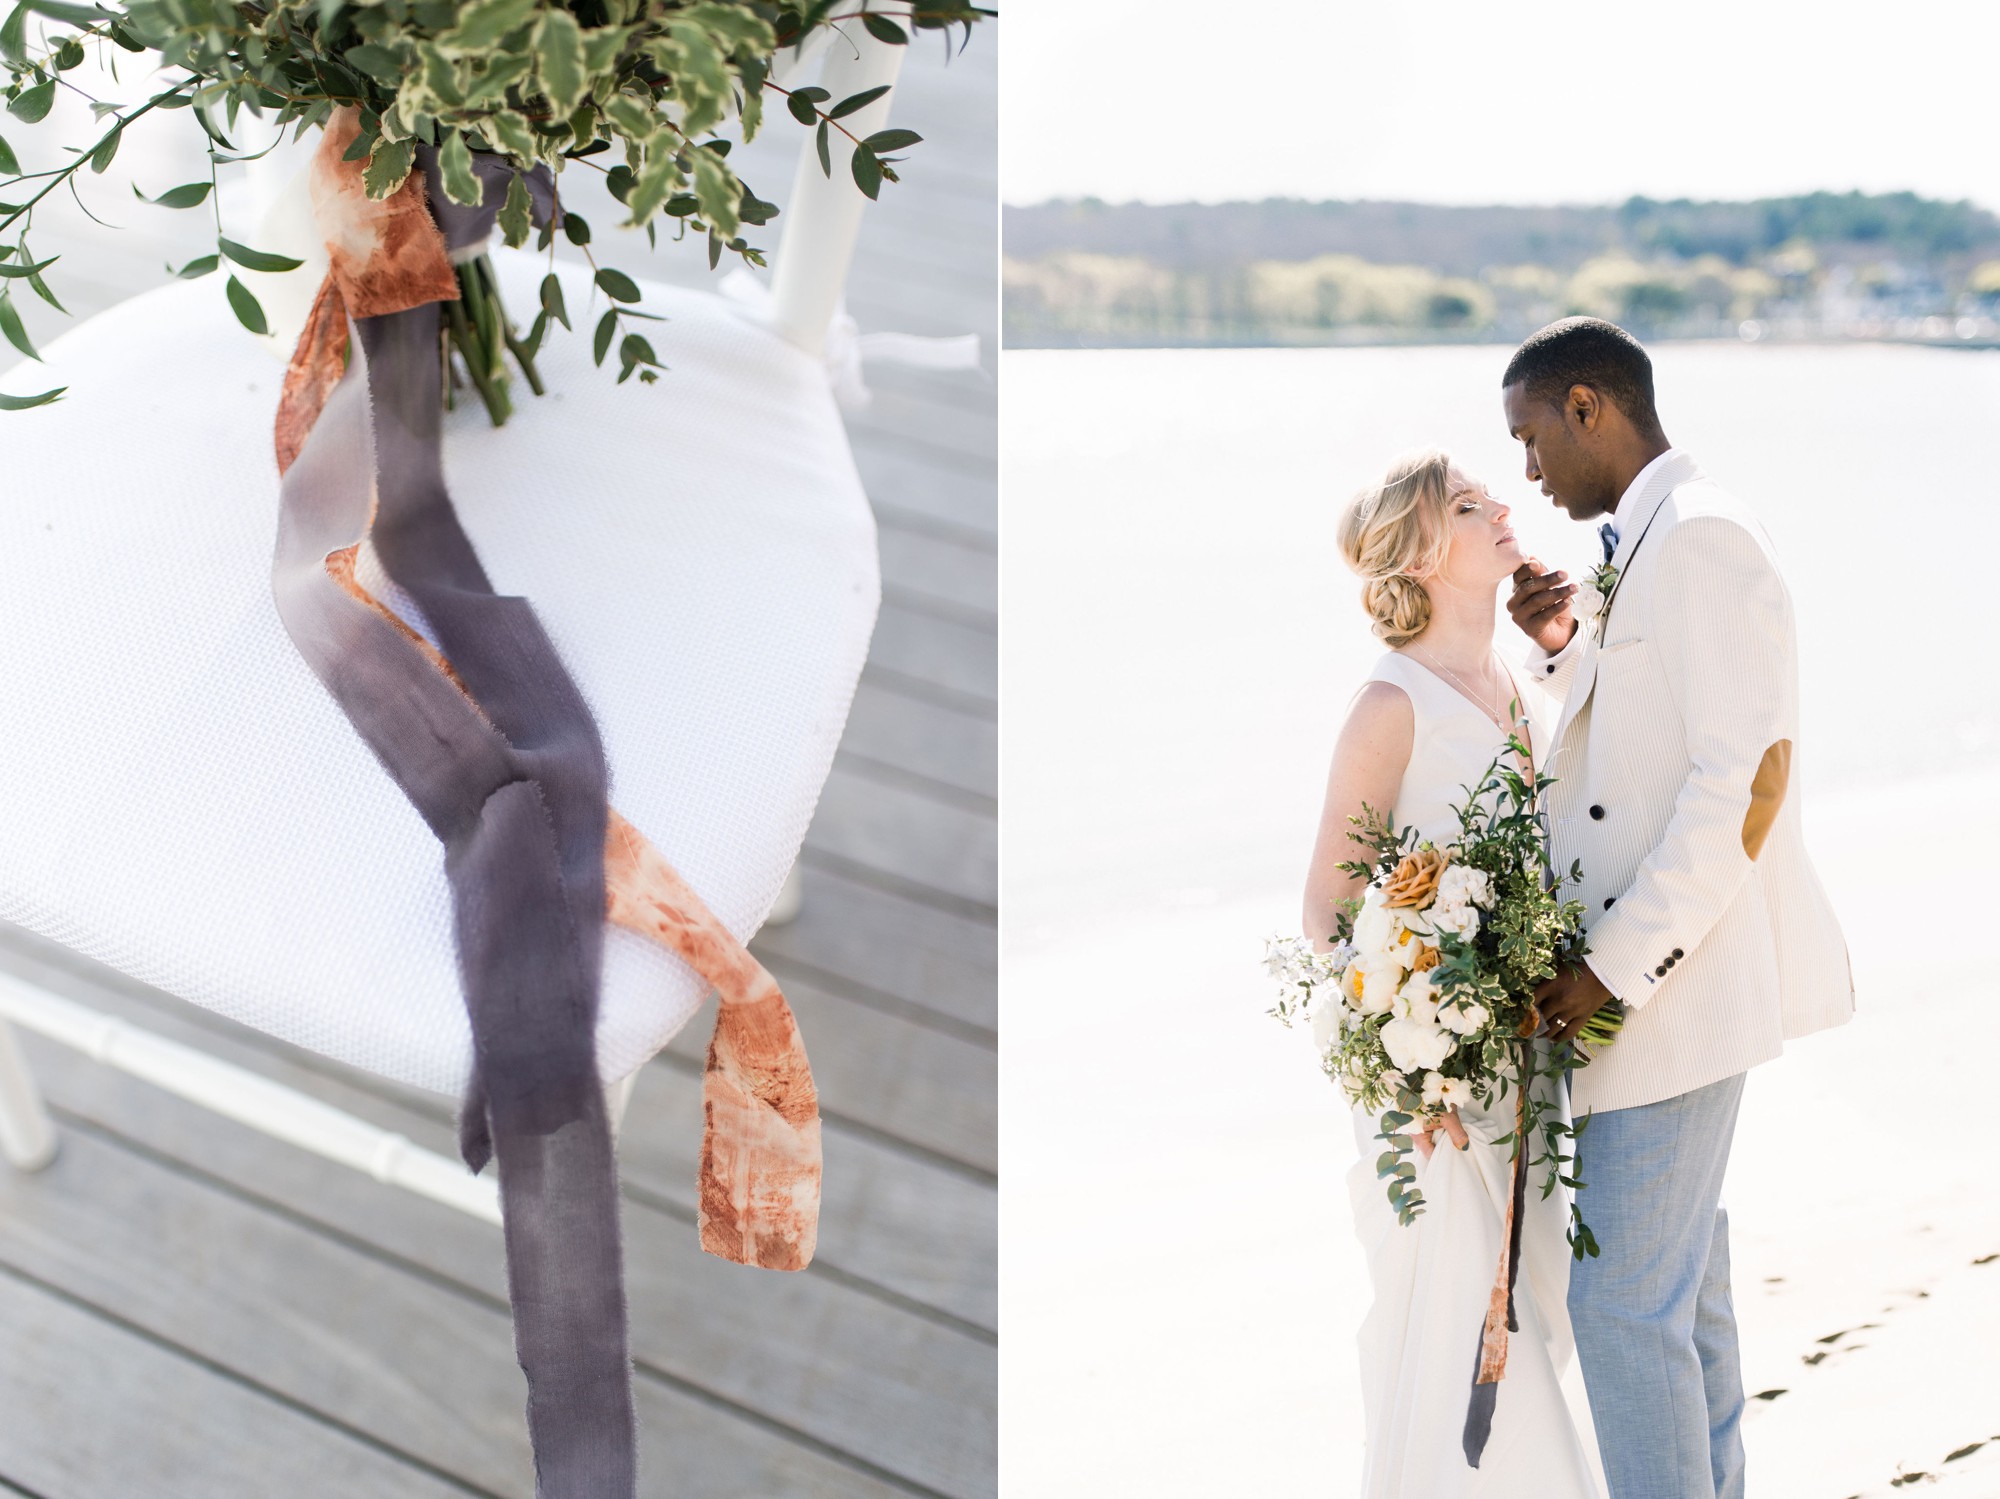 Gloucester MA Beauport Hotel Wedding | Tuscan meets modern | silk ribbon on bridal bouquet by Evans Gray and bride and groom on beach for wedding portraits